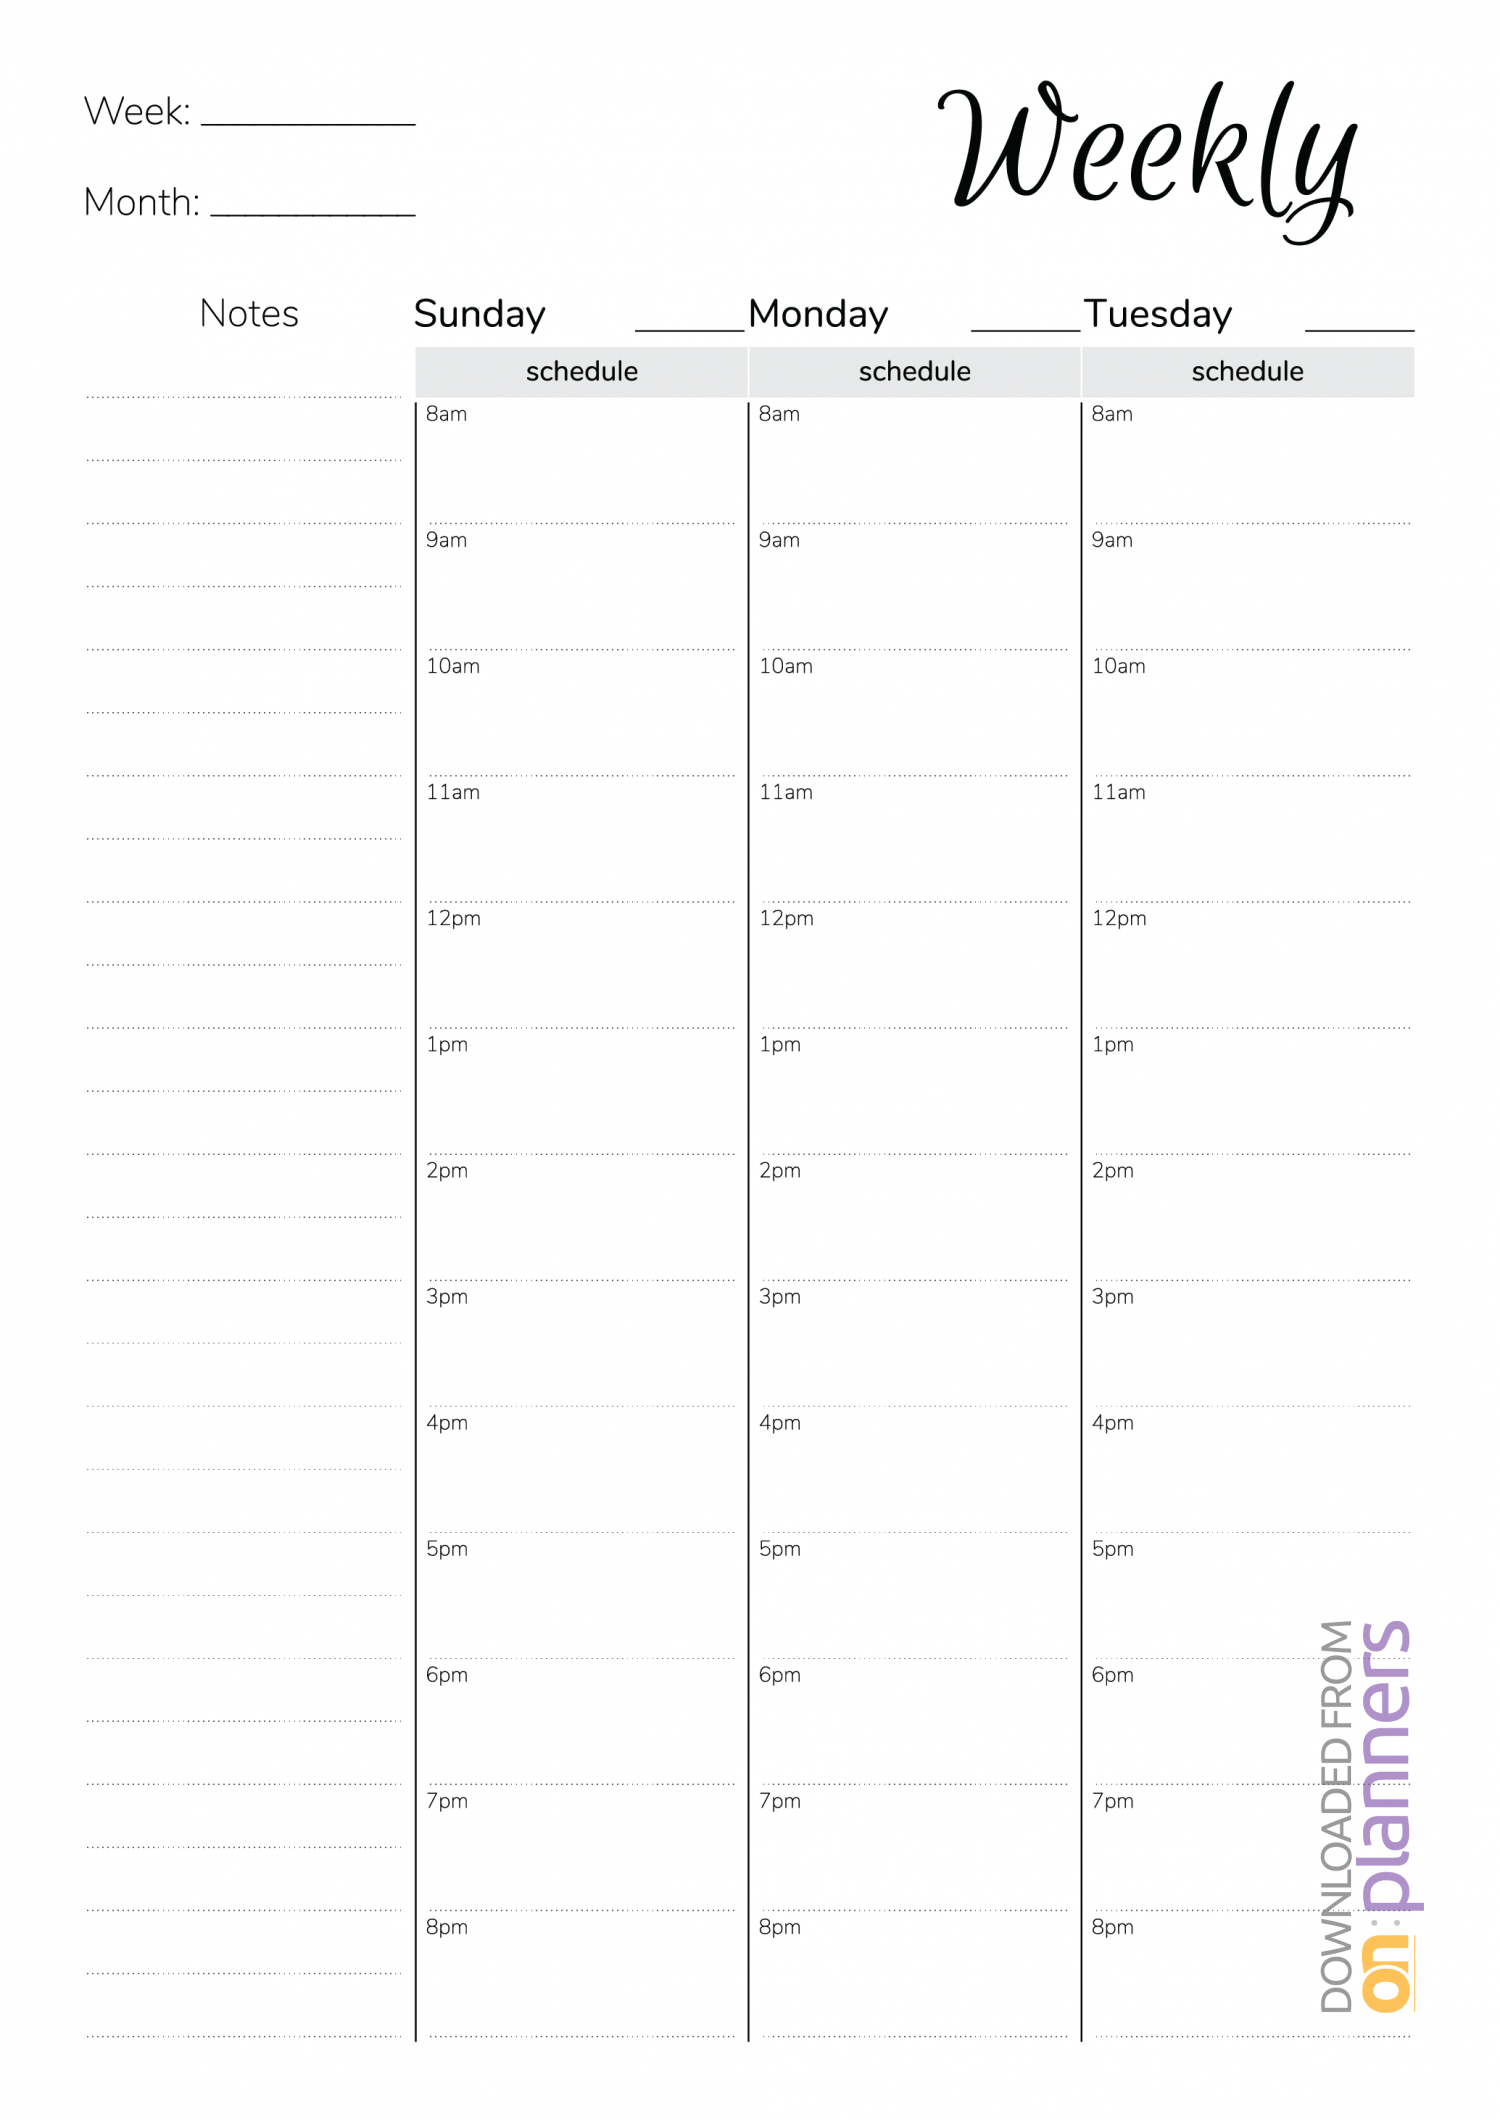 Download Printable Weekly Hourly Planner With Notes Section Pdf within Hourly Weekly Schedule Pdf